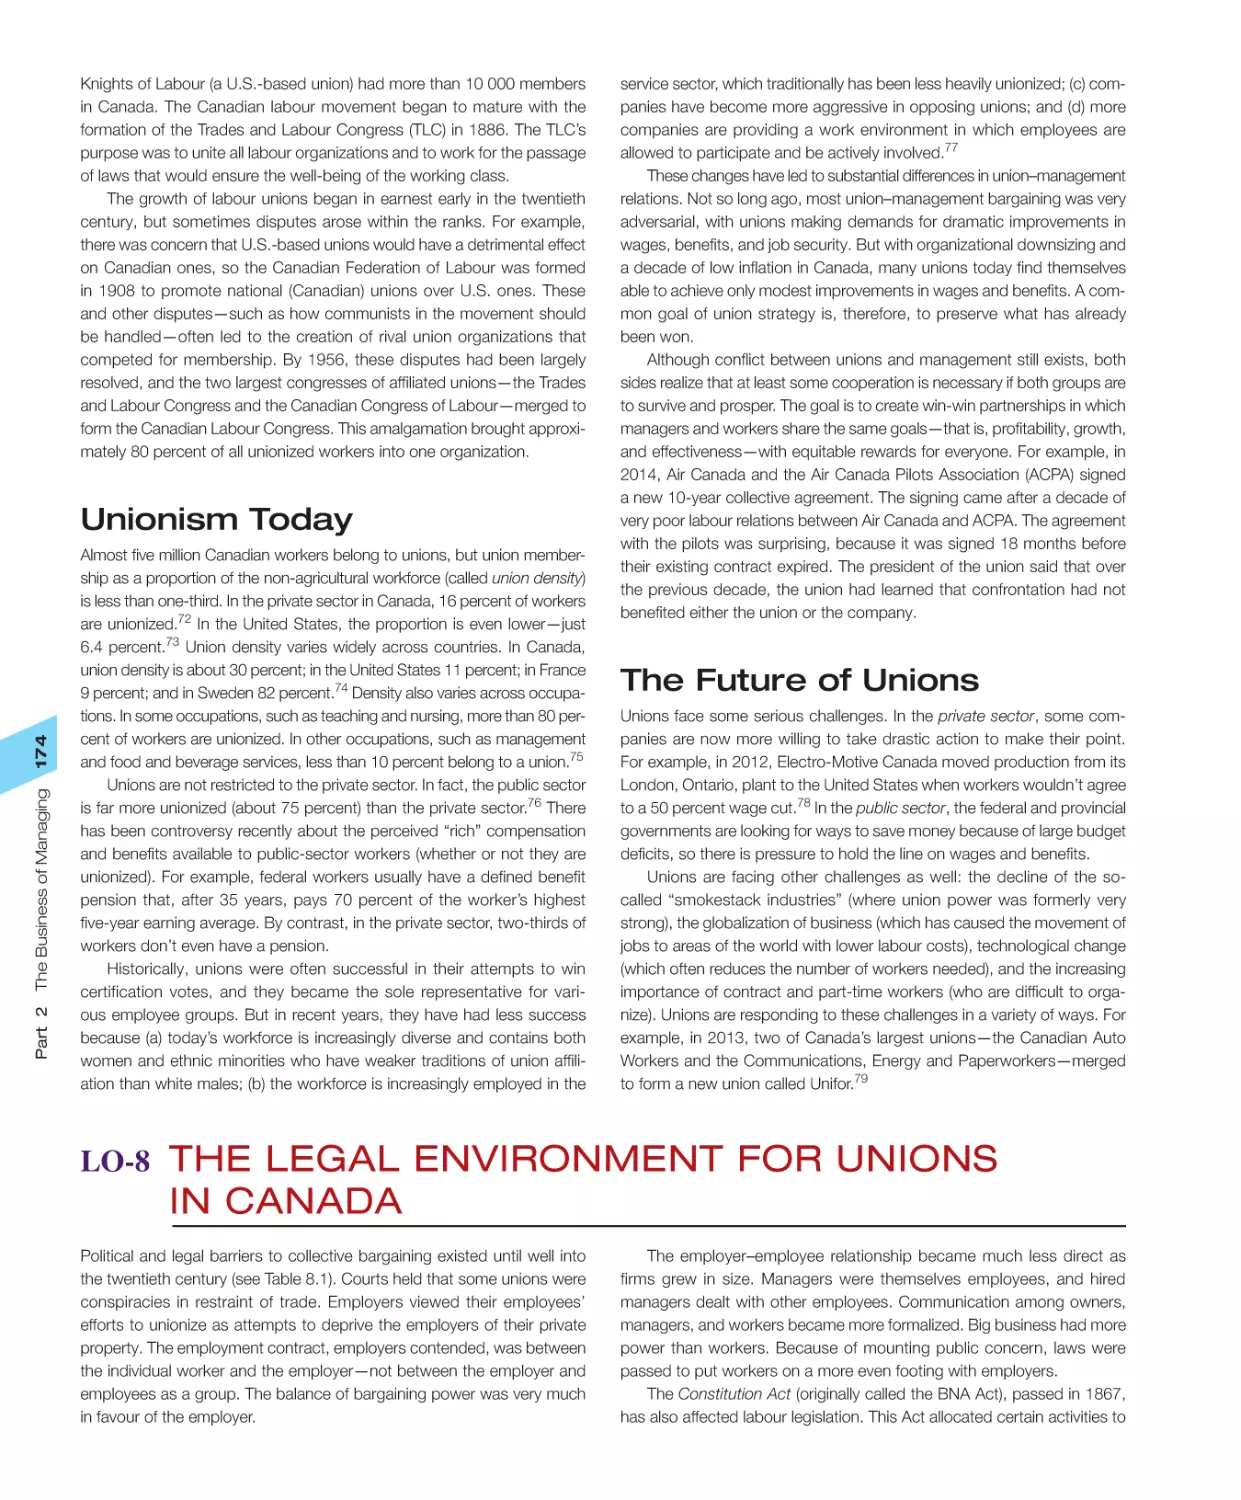 Unionism Today
The Future of Unions
LO‐8 The Legal Environment for Unions in Canada